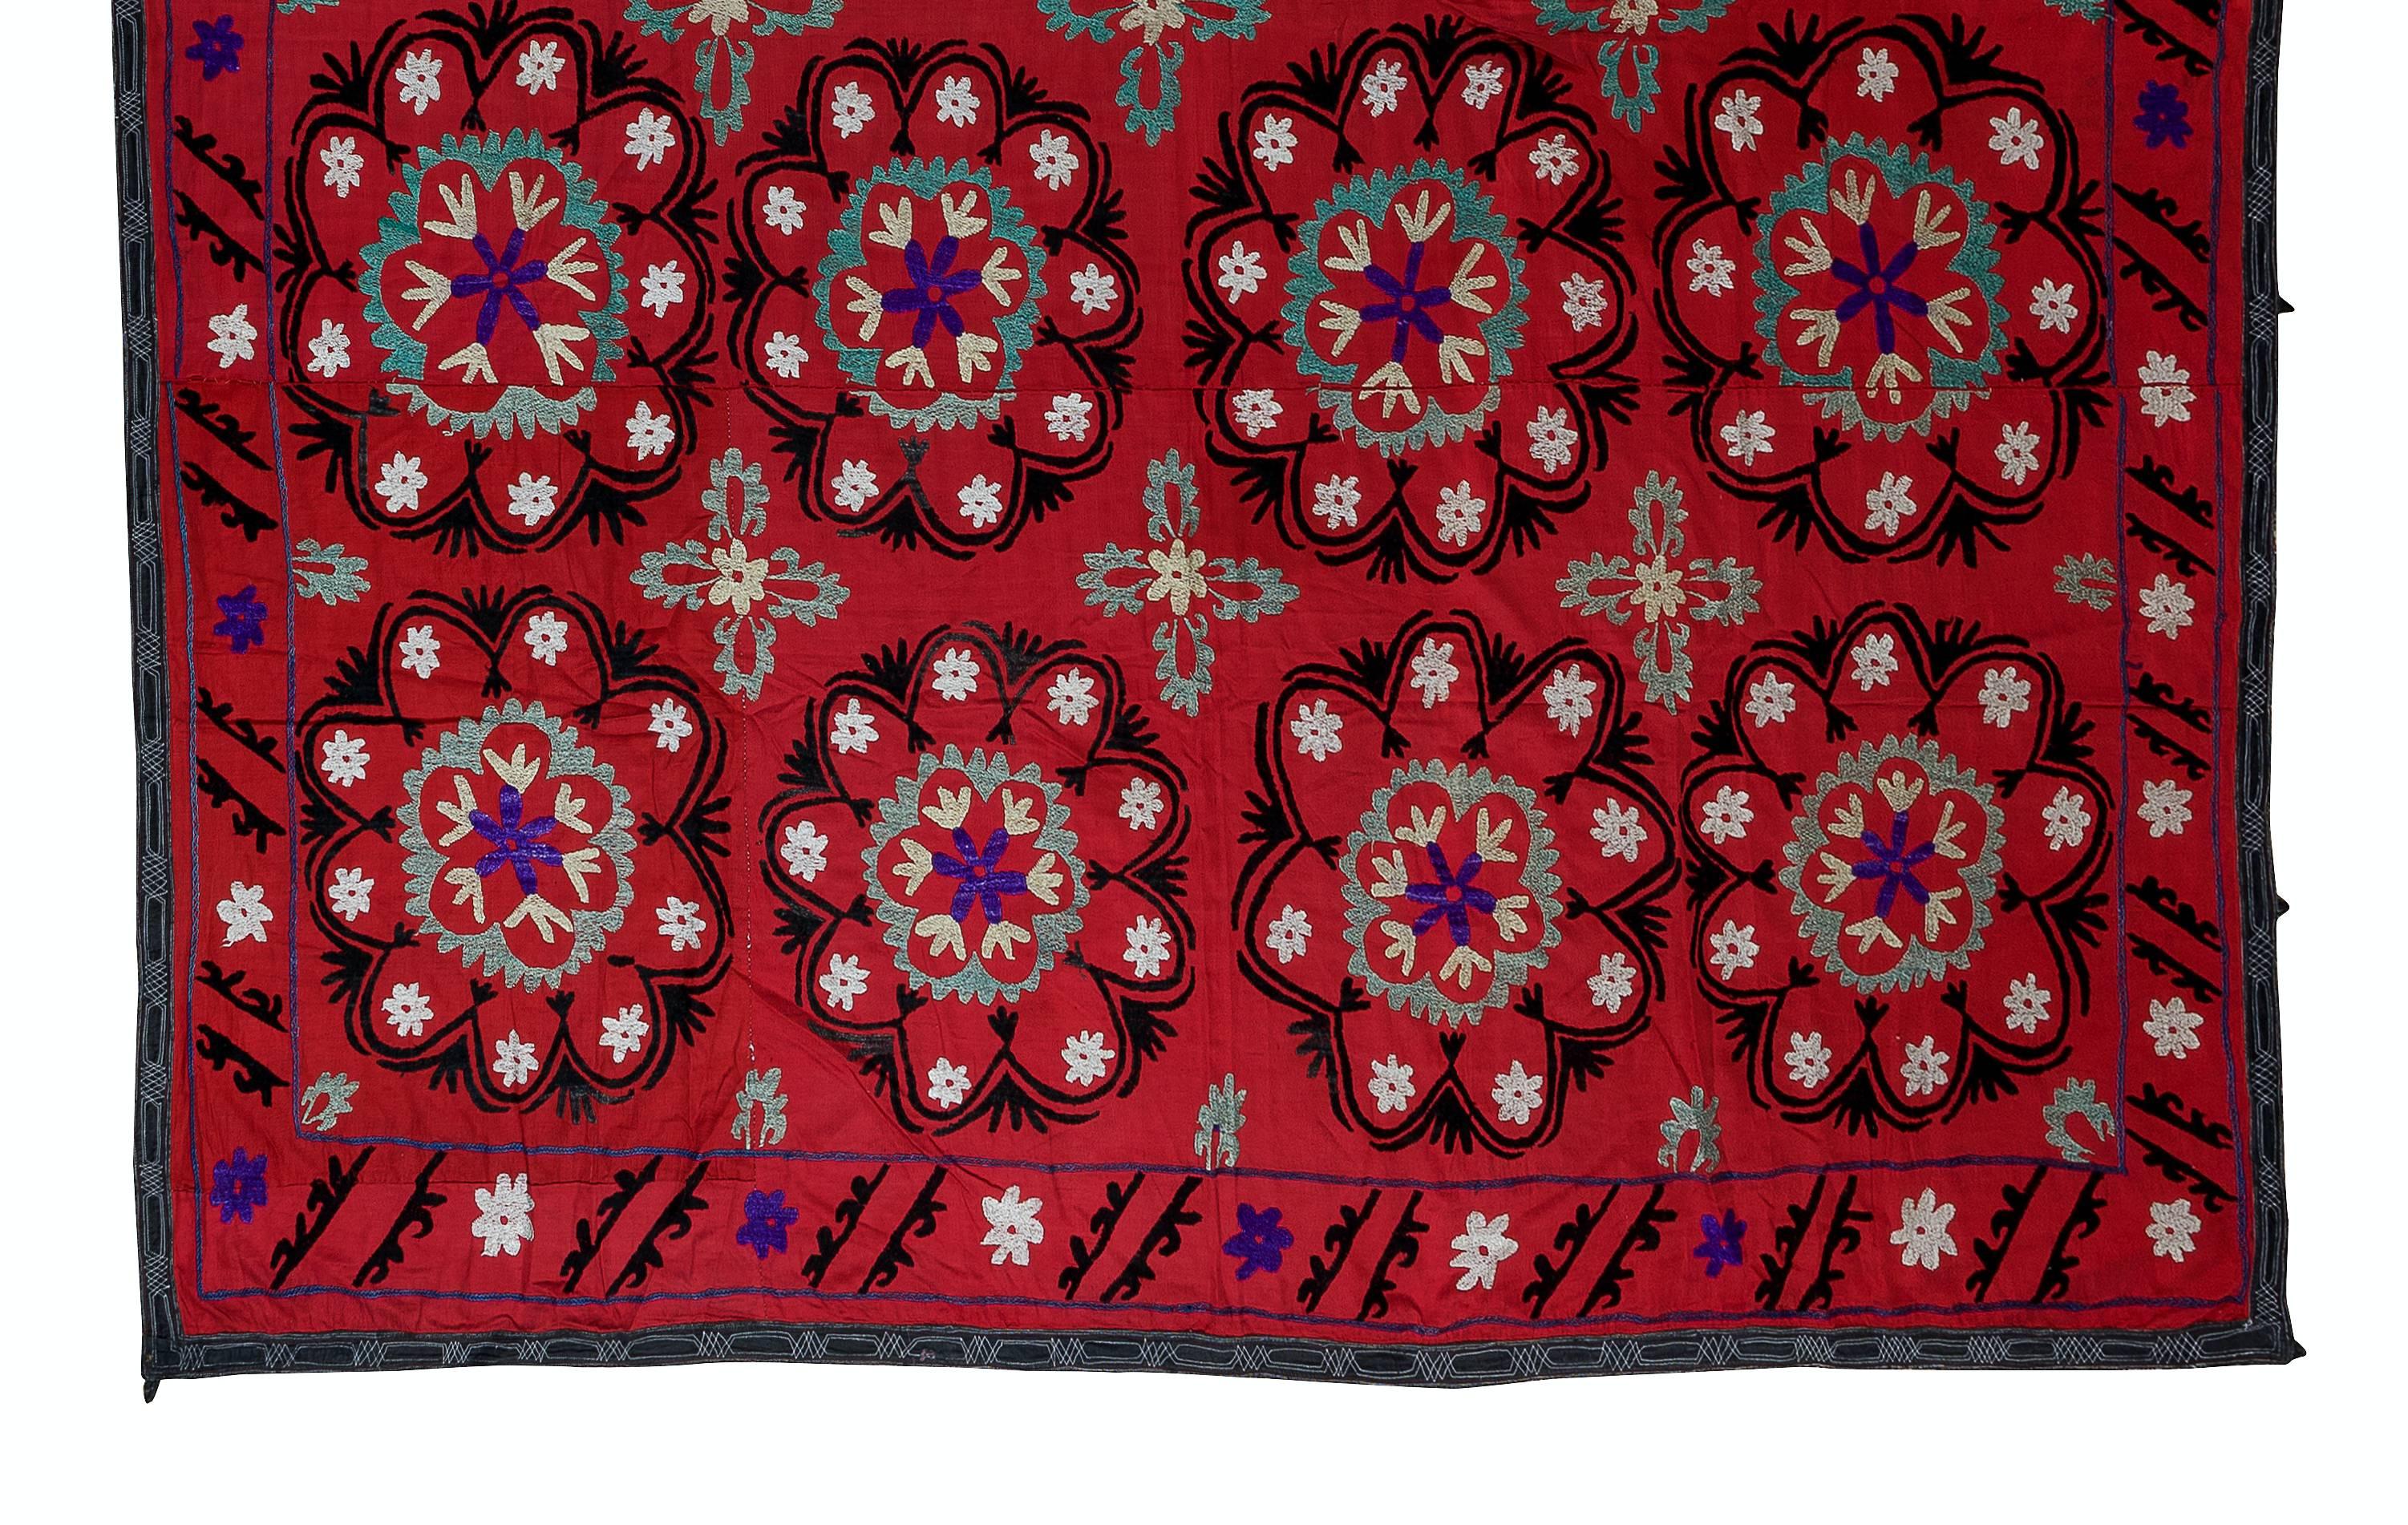 Embroidered Vintage Silk Hand Embroidery Bedspread, Uzbek Suzani Fabric Throw For Sale